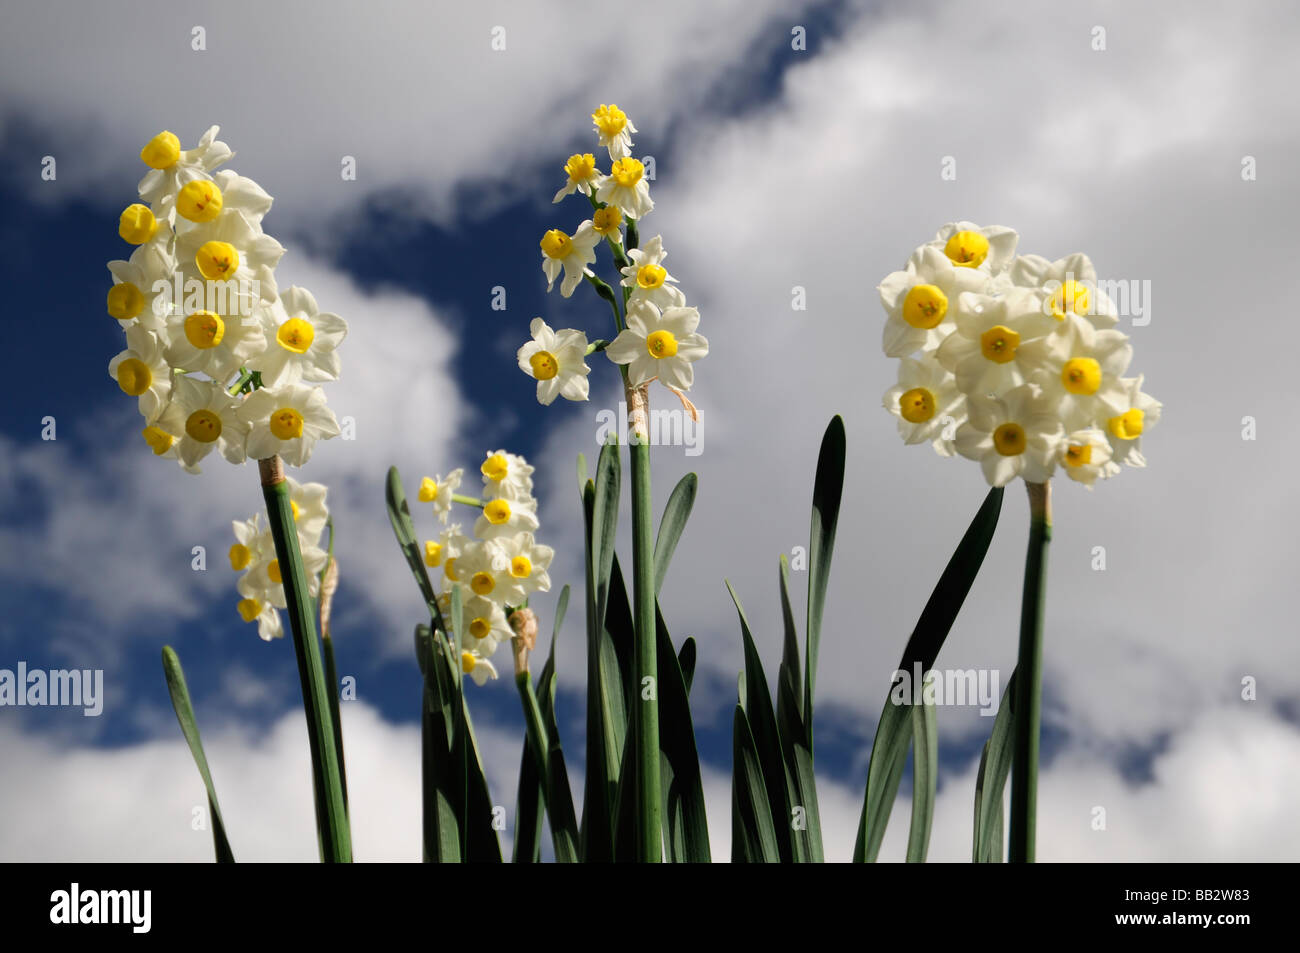 narcissus minnow daffodil white flower perianth with yellow cup illuminated lit by bright sunlight blue sky clouds looking up Stock Photo